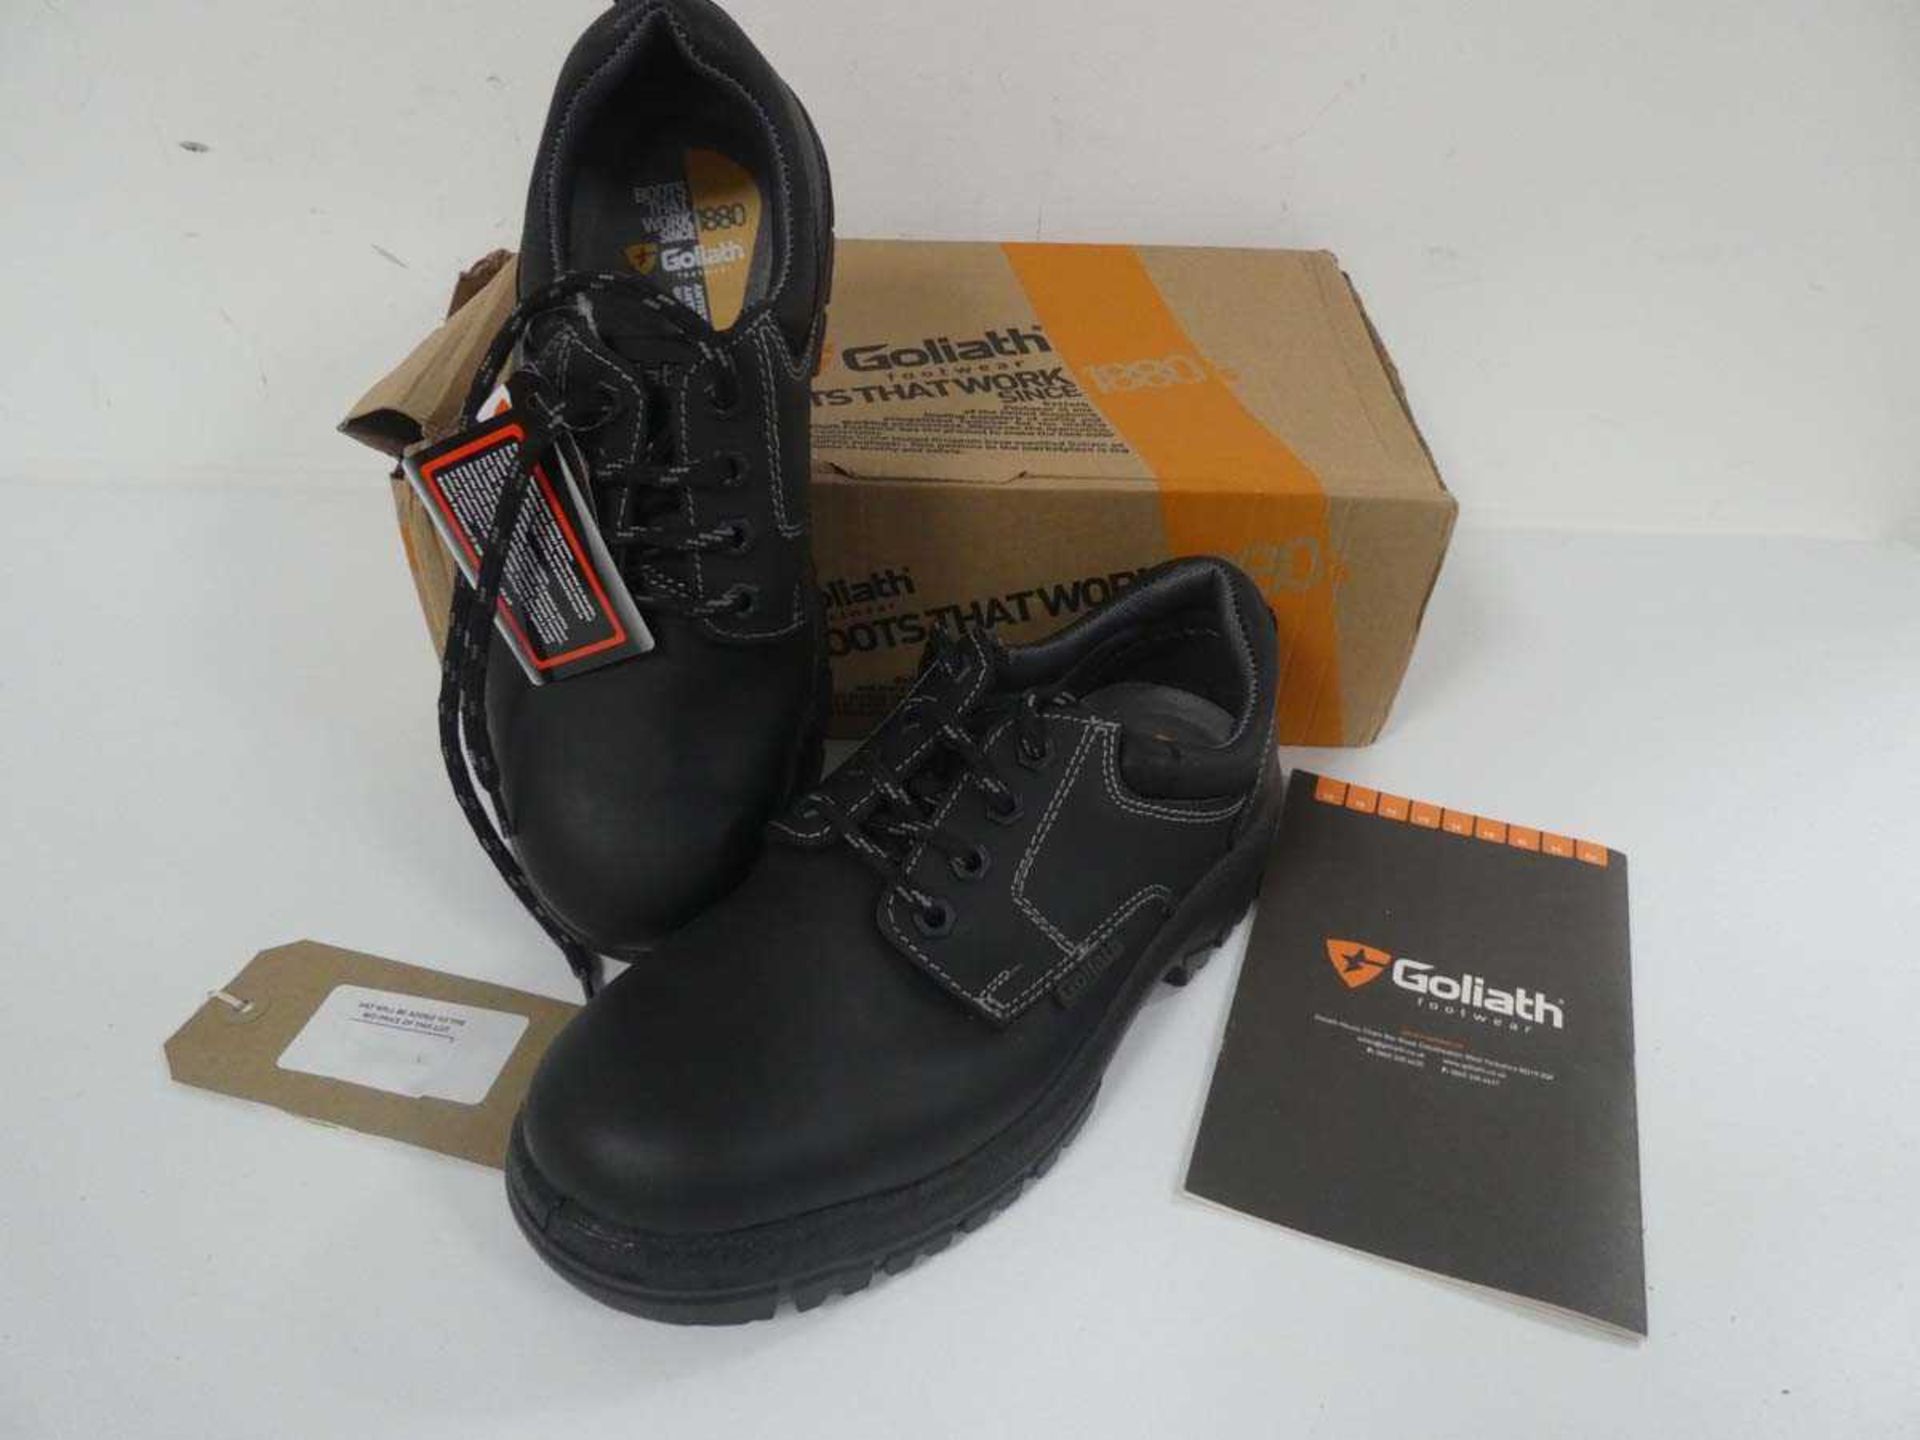 +VAT Boxed pair of Goliath Footwear safety trainer shoes in black with toe caps size 6